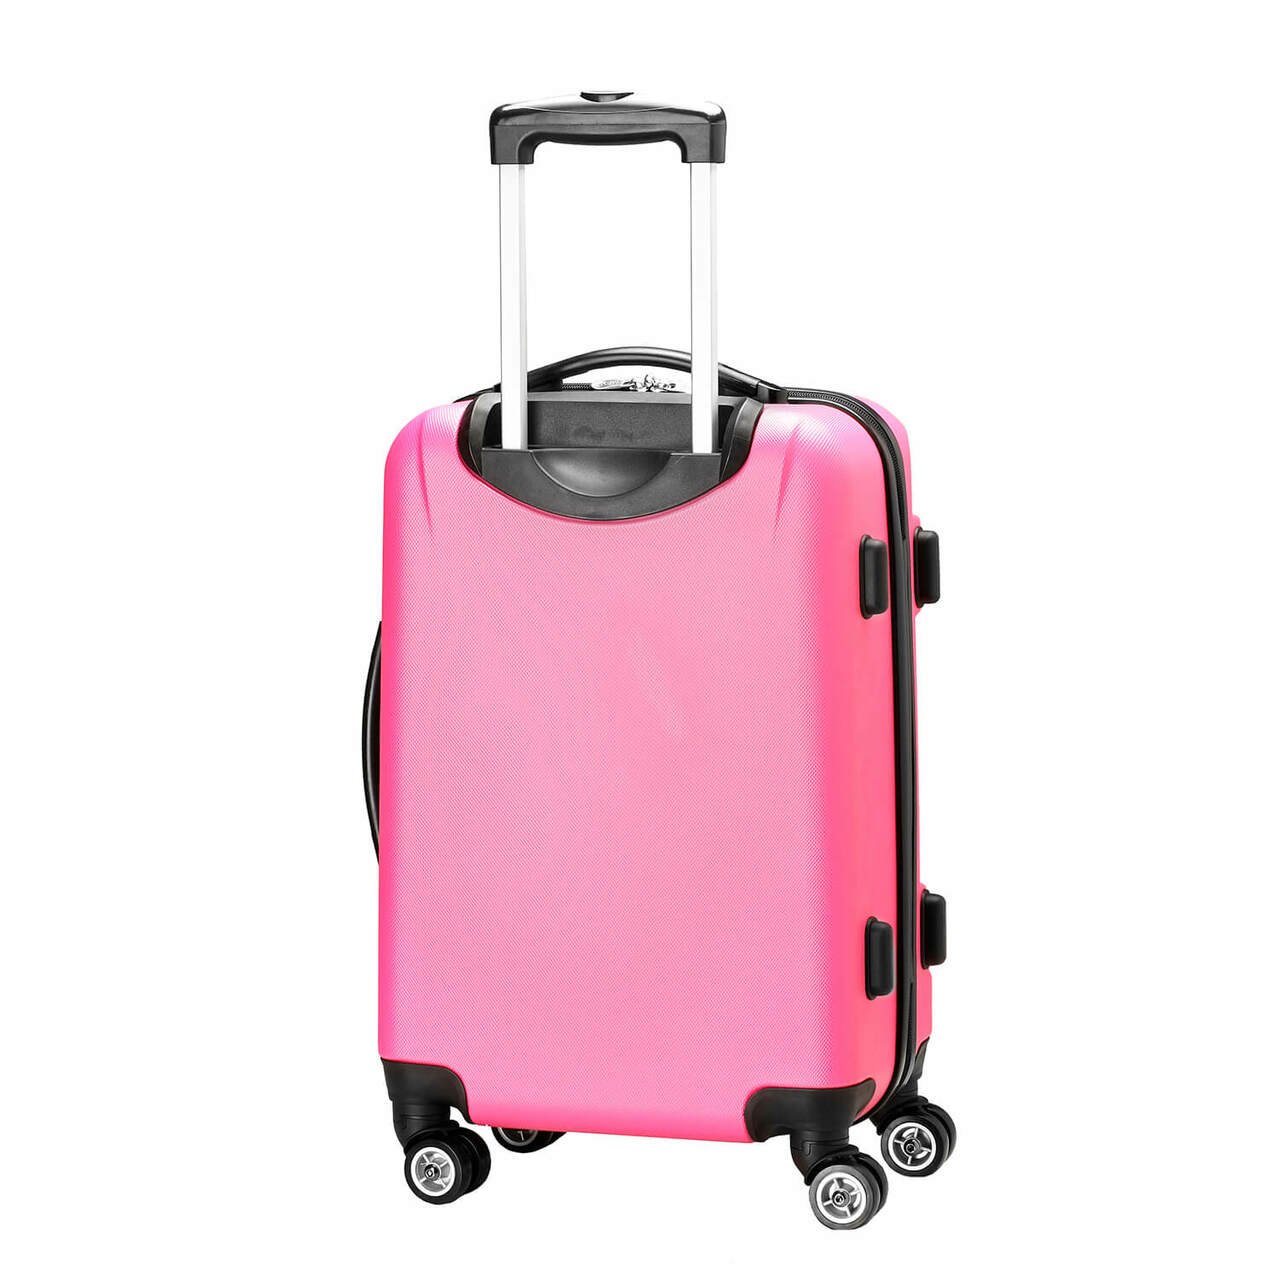 Portland Trail Blazers 20" Pink Domestic Carry-on Spinner